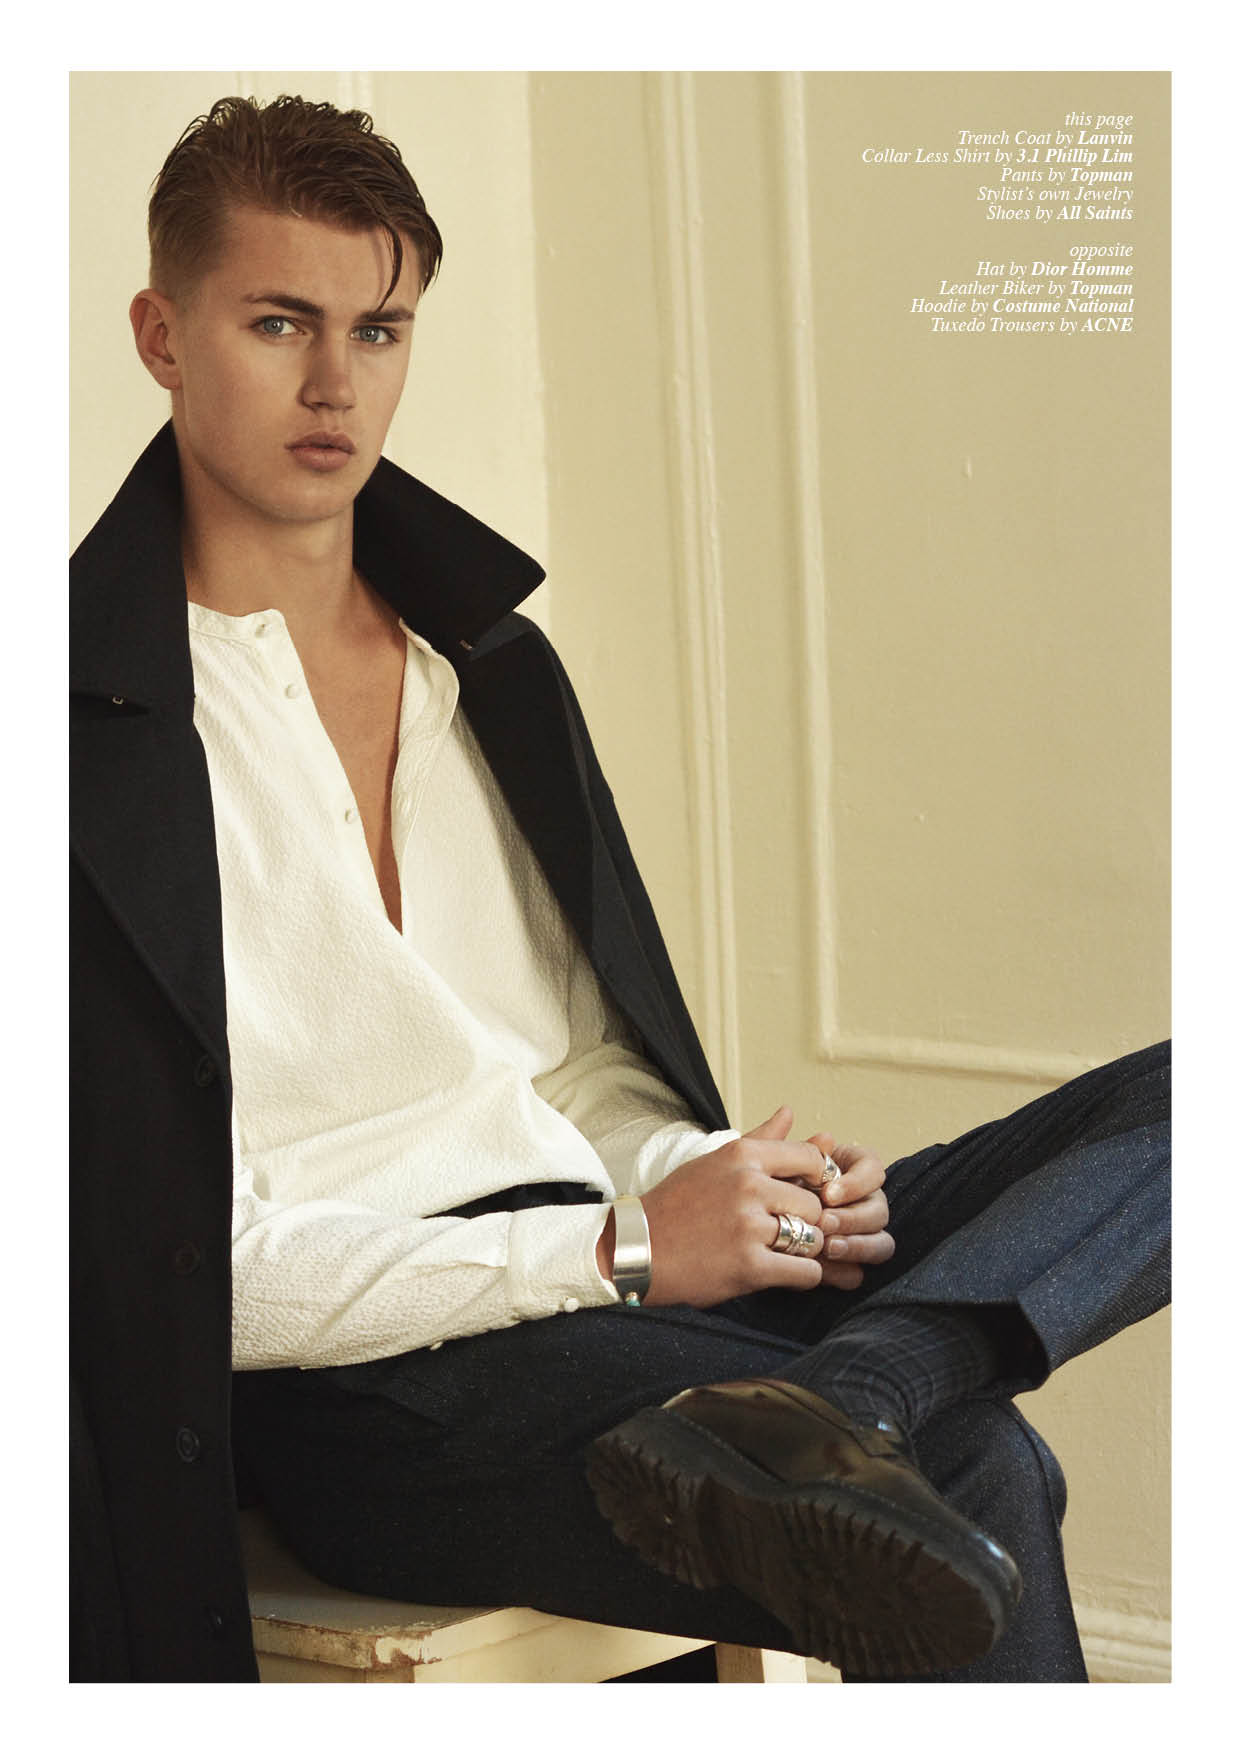 Samuel Harwood at New York Models for Client Style Guide USA #2 ...